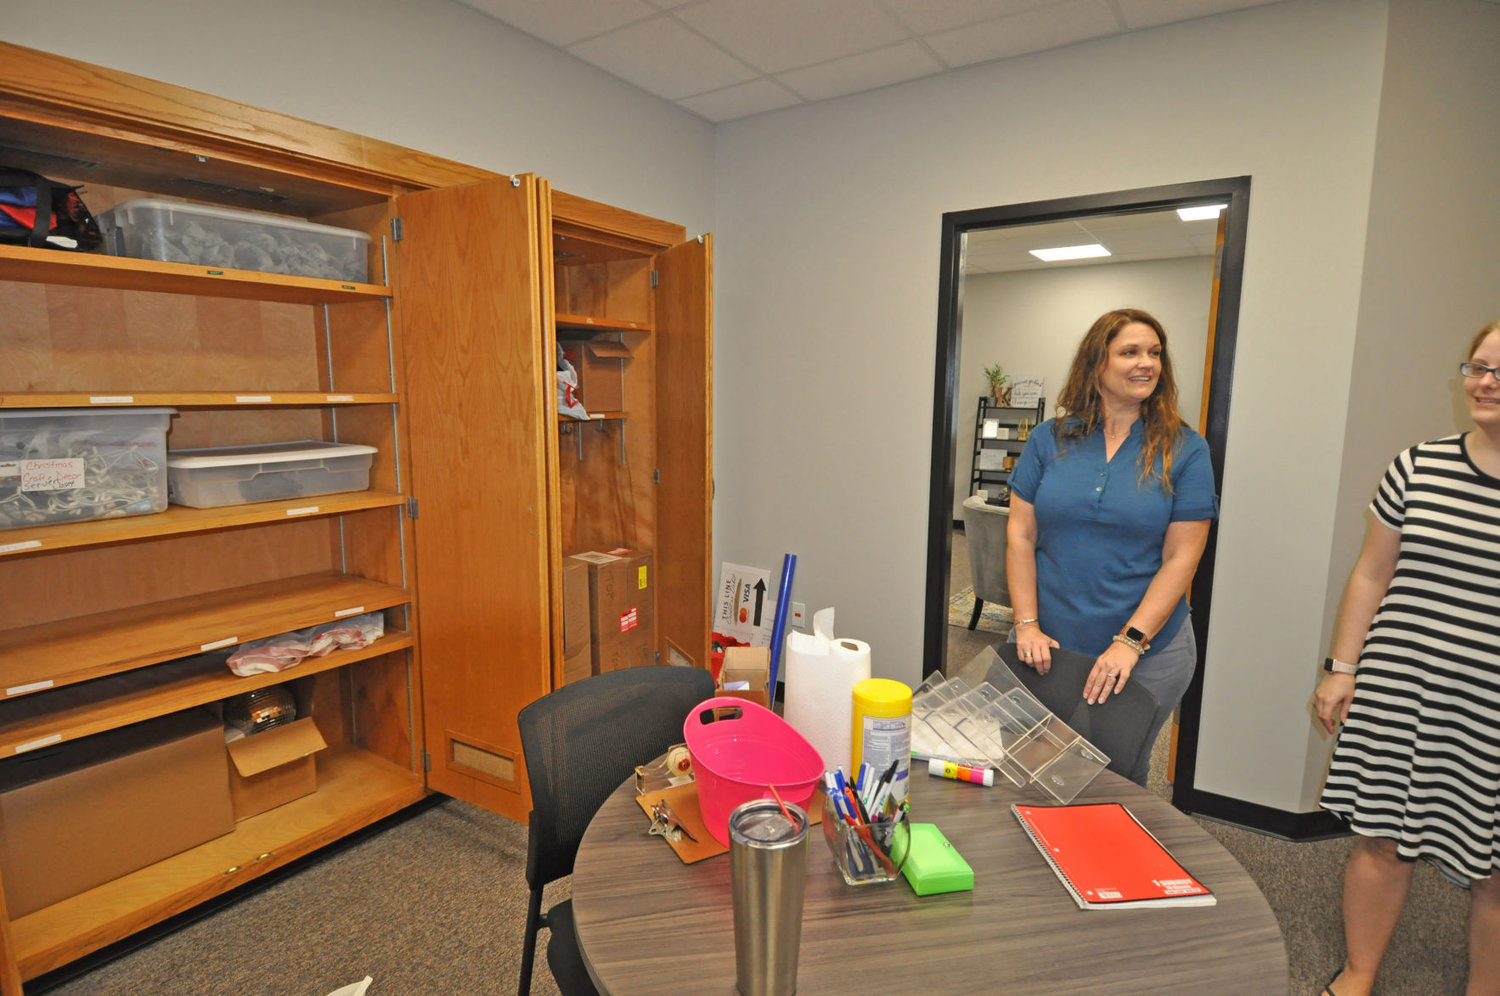 Kate Doty, left, and Sara Clapp finish unpacking as the new Montgomery County Youth Service Bureau offices at what used to be the Caleb Mills School on West Pike Street. Monday was the first official day in the newly renovated building.